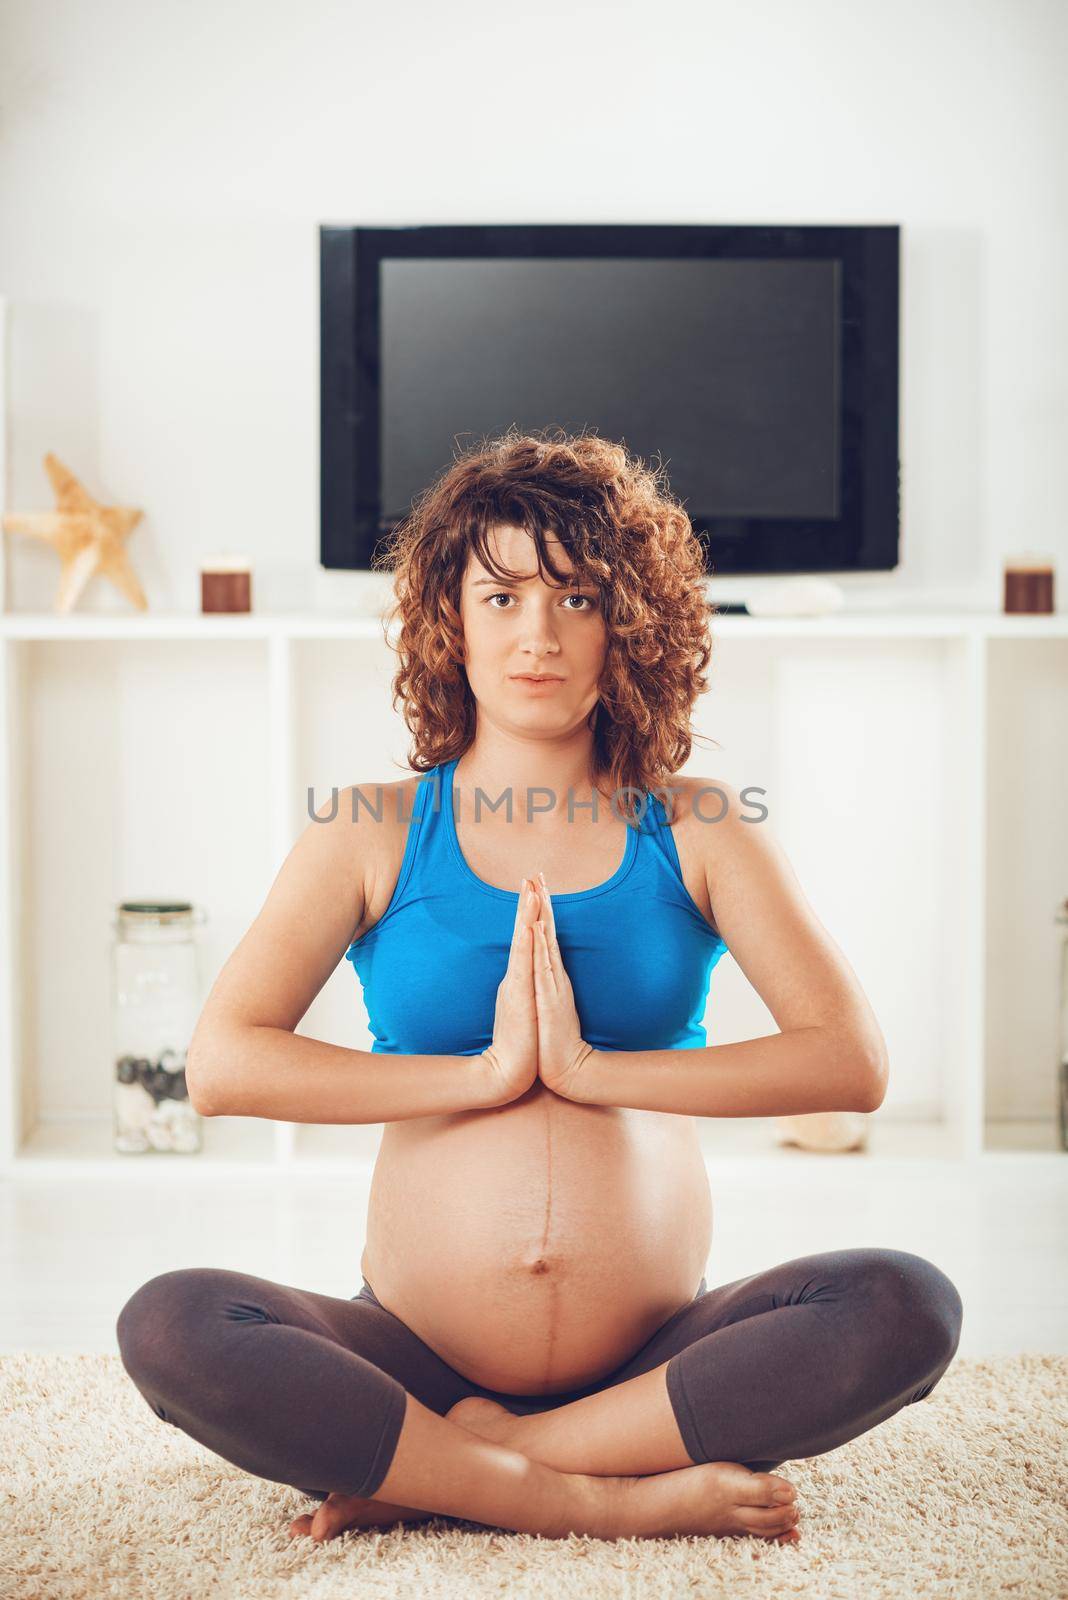 Yoga For Pregnant Women by MilanMarkovic78